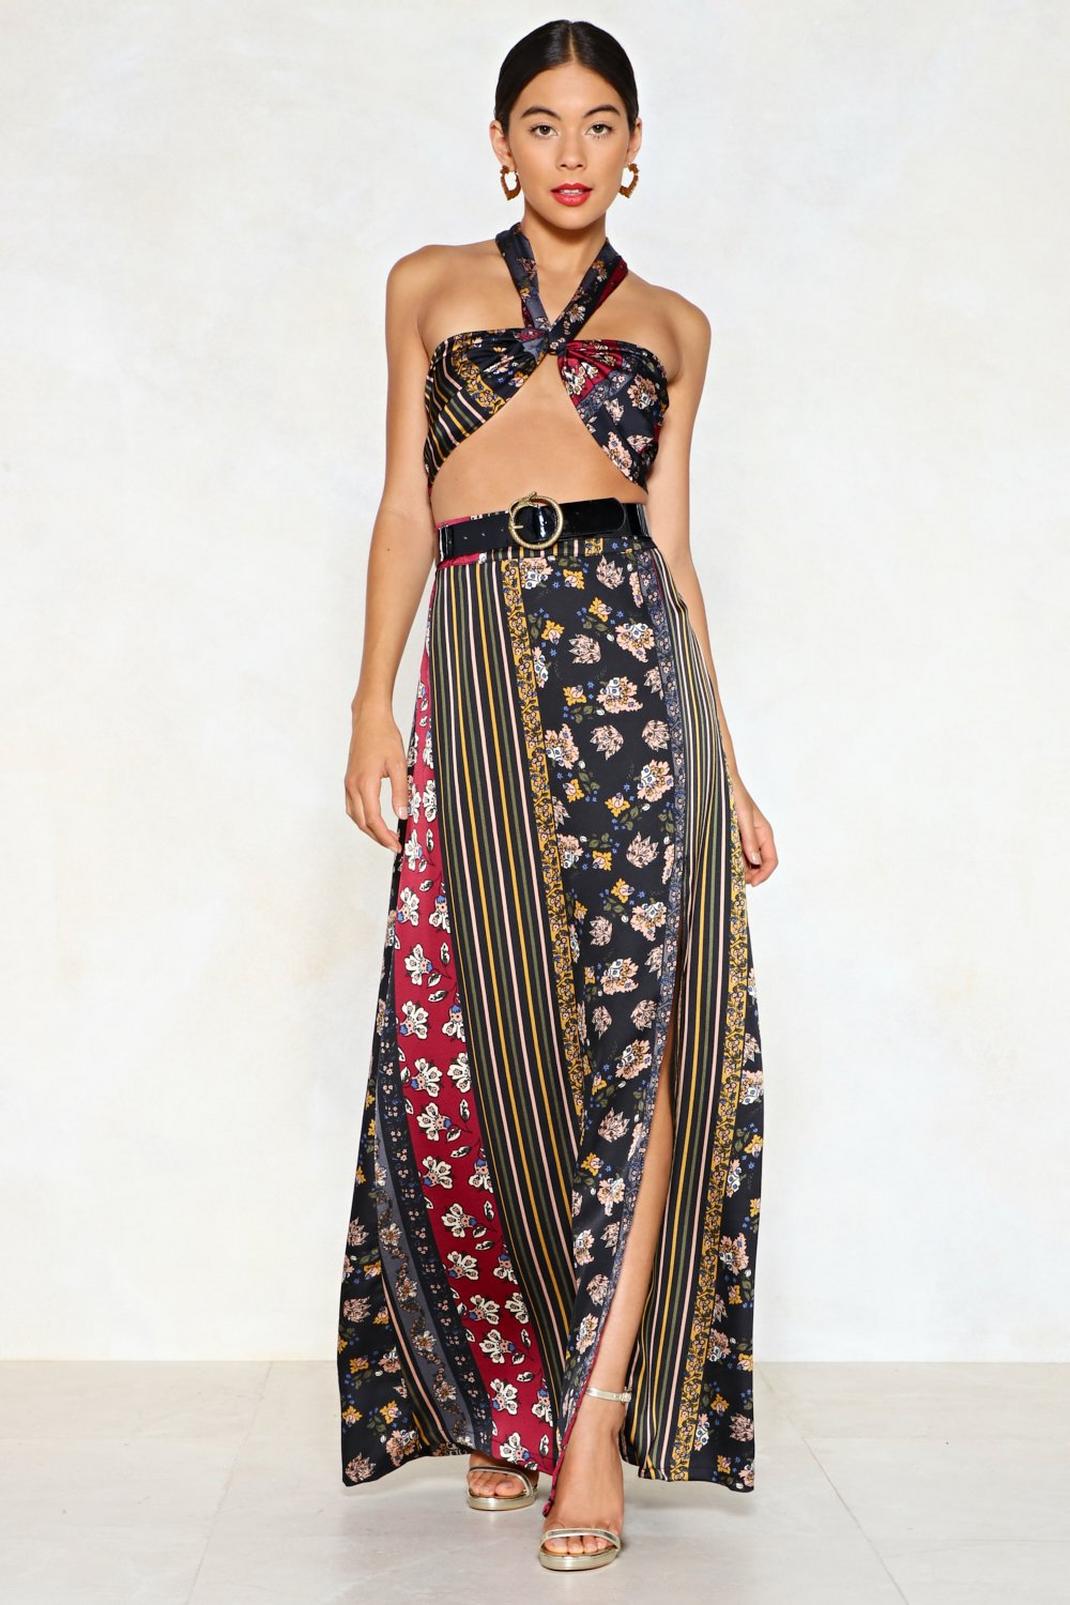 Get Your Mix Printed Bralette and Skirt Set